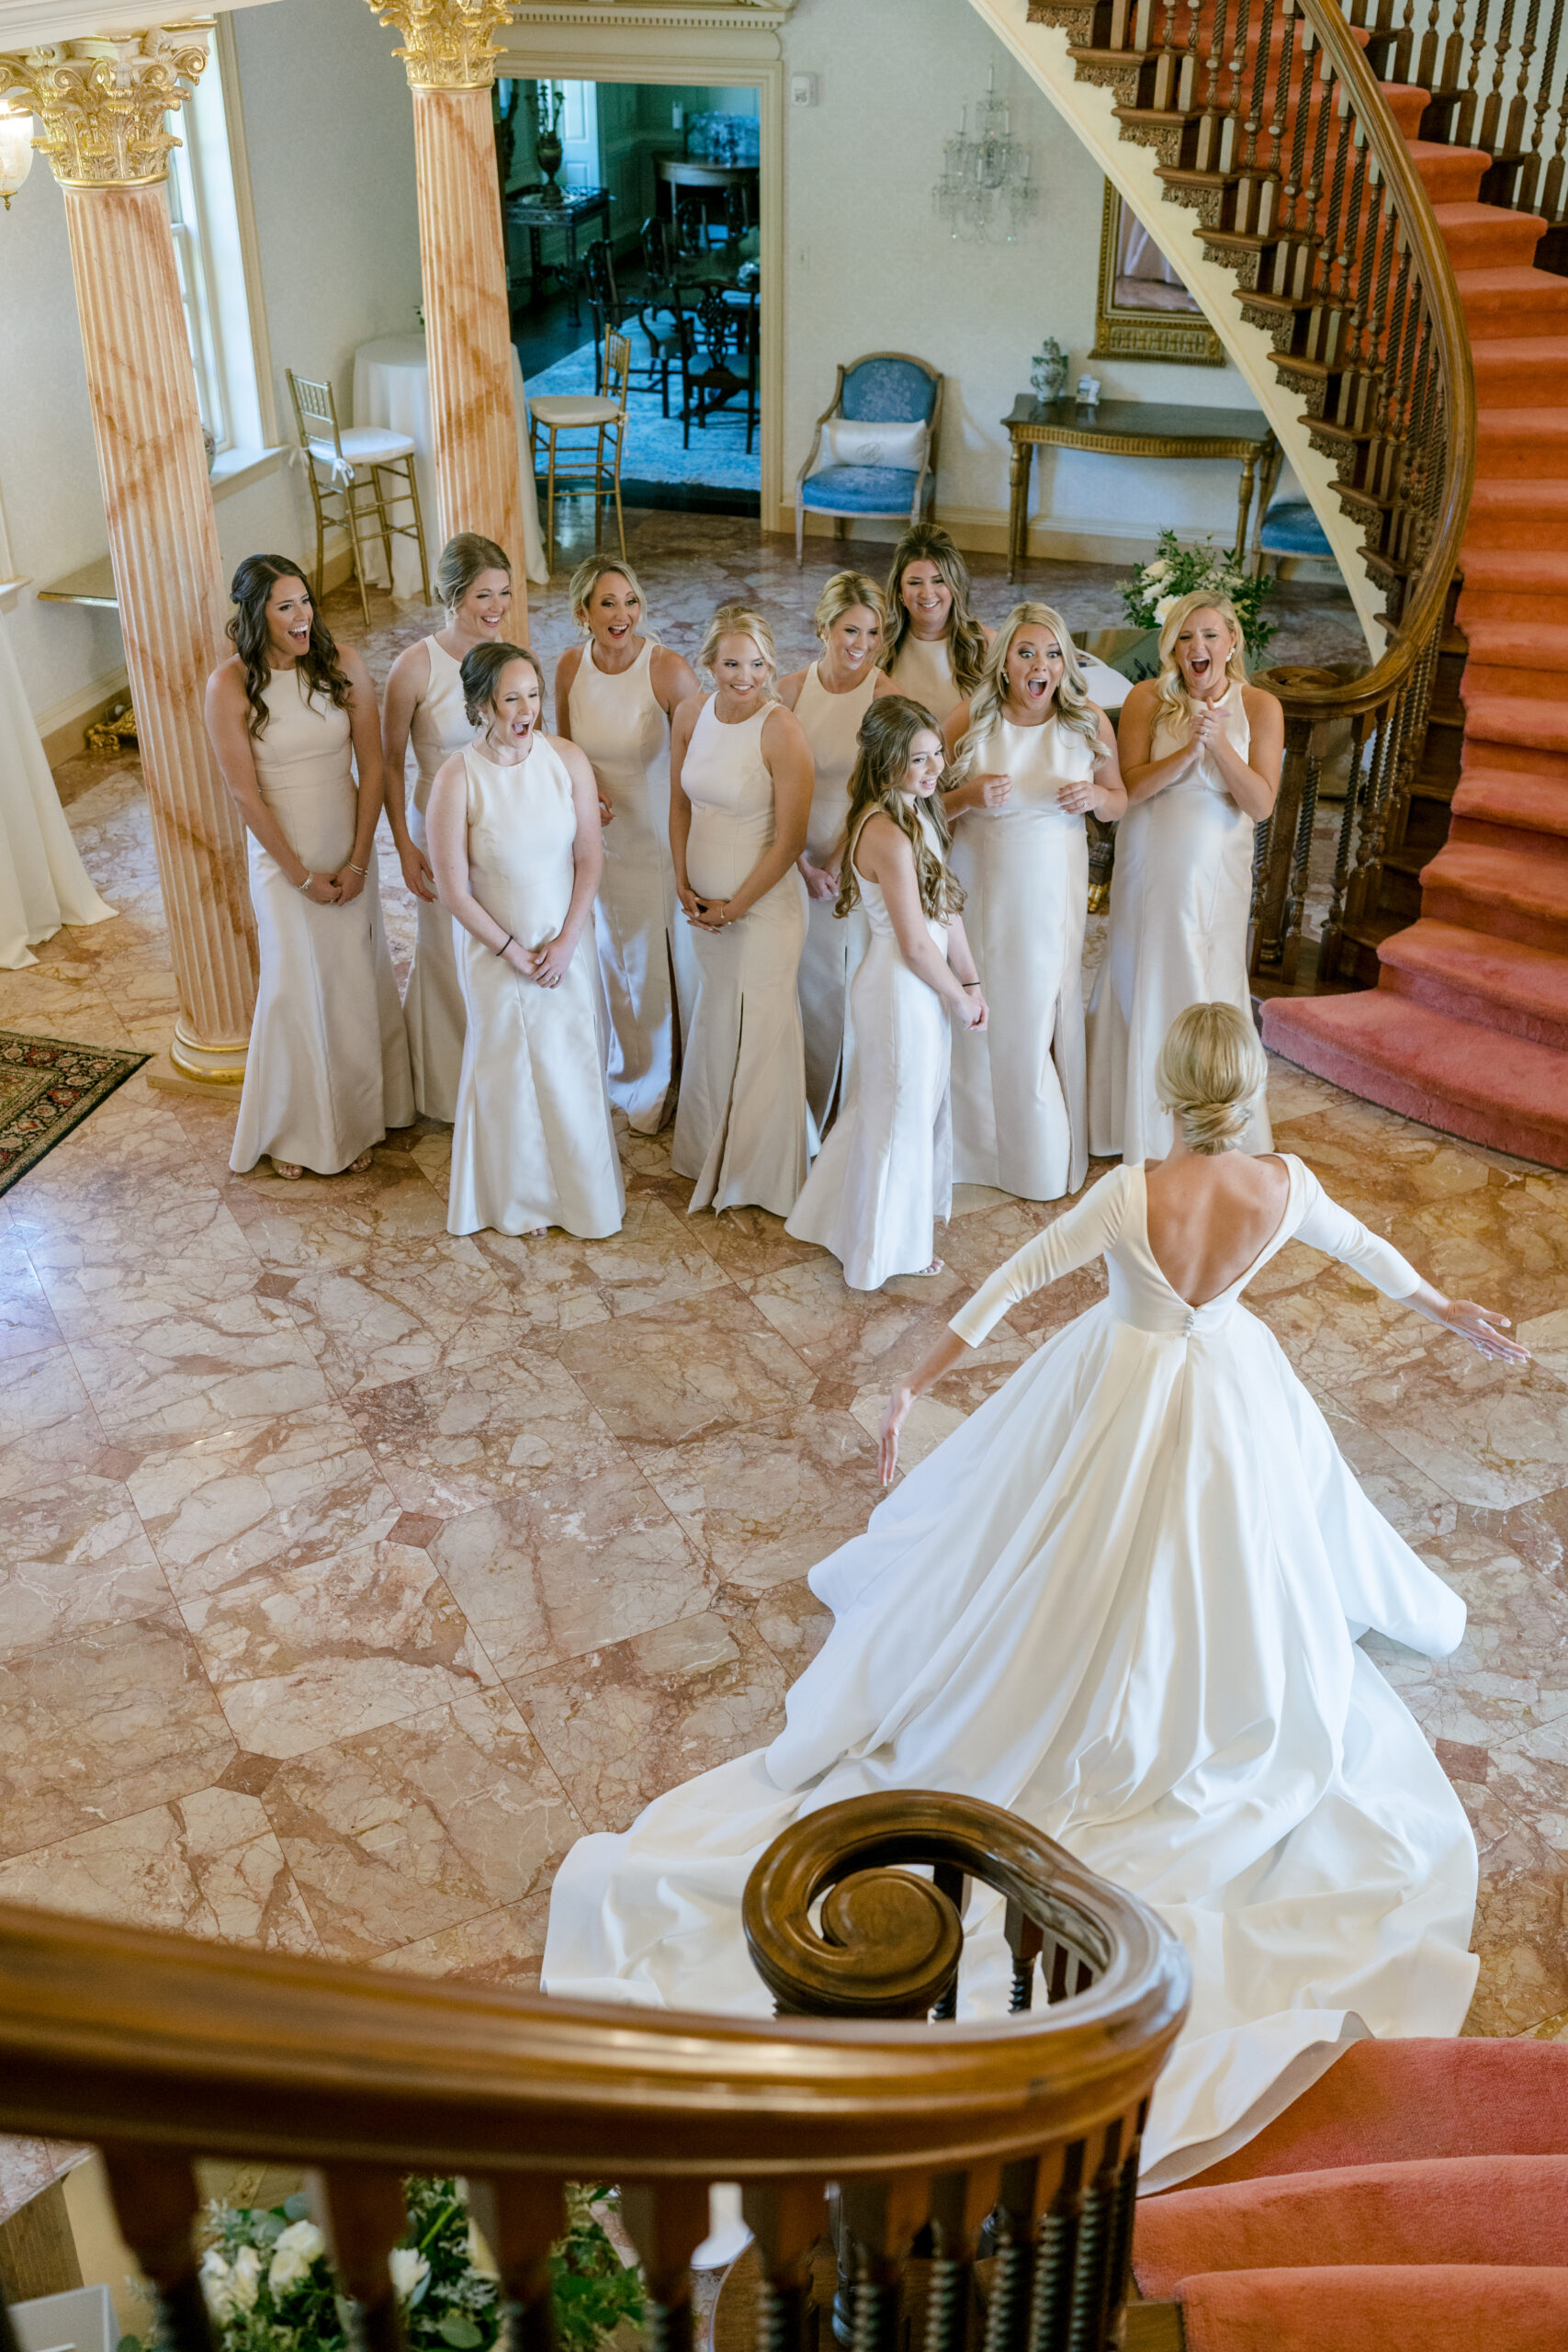 Timeless Wedding Featuring a Custom Blue Willow by Anne Barge Wedding Dress